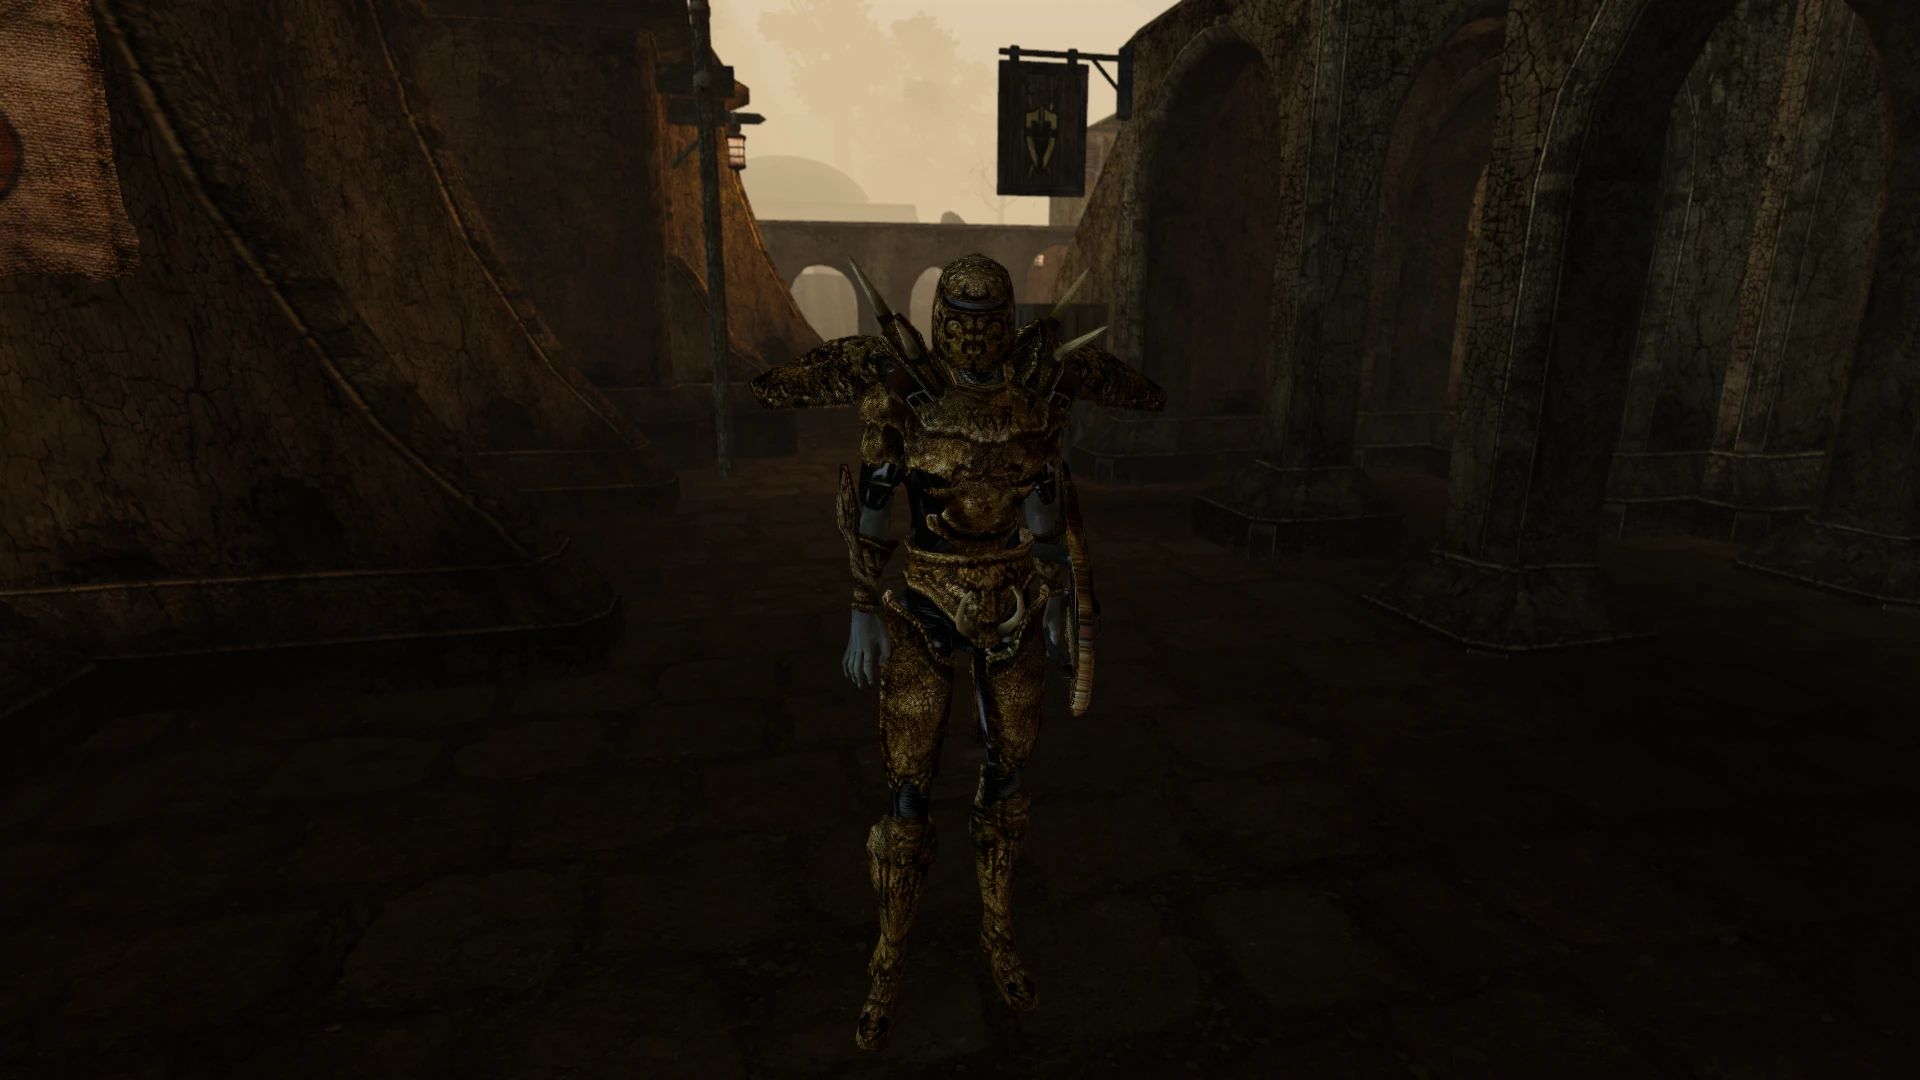 morrowind pc download mods